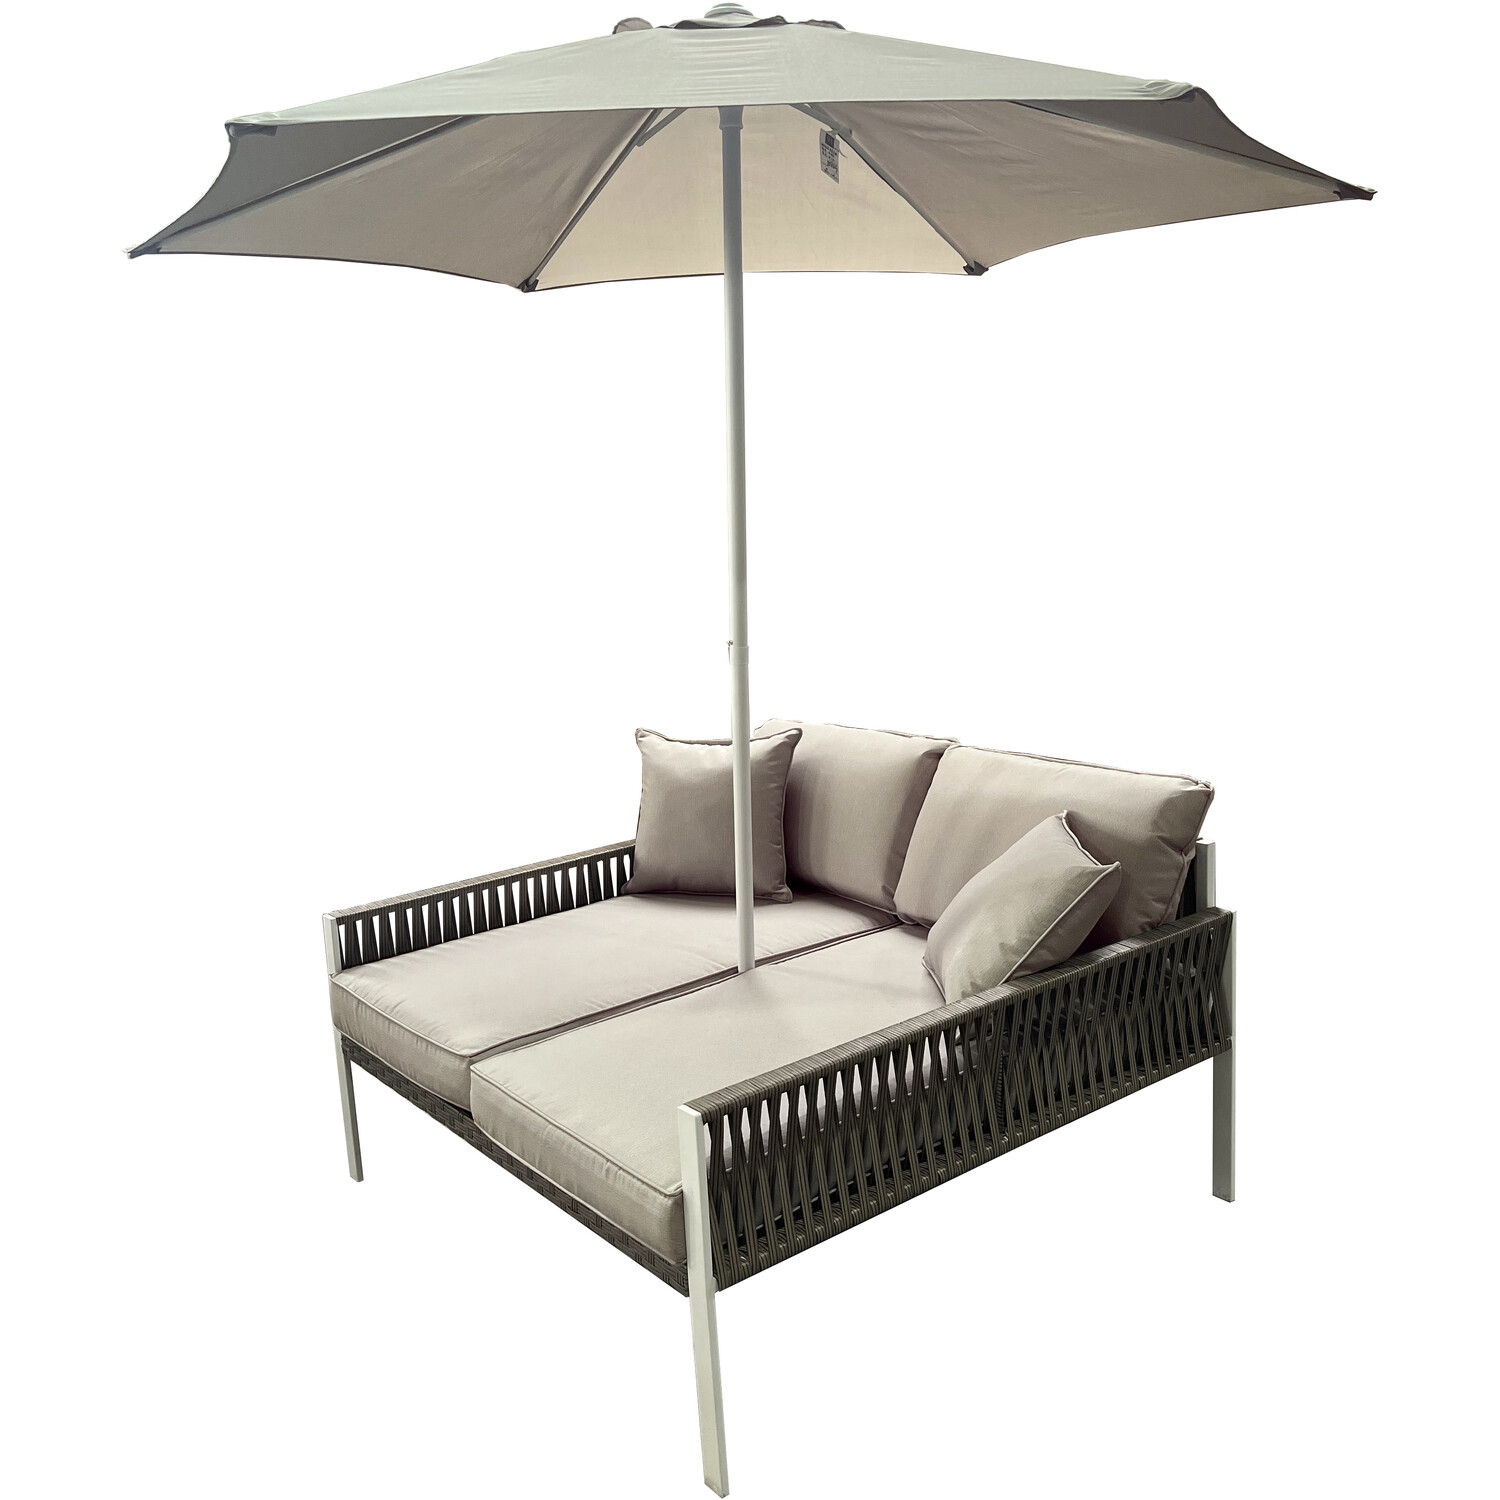 Malay Mayfair Day Bed Parasol 2.3m Image 1